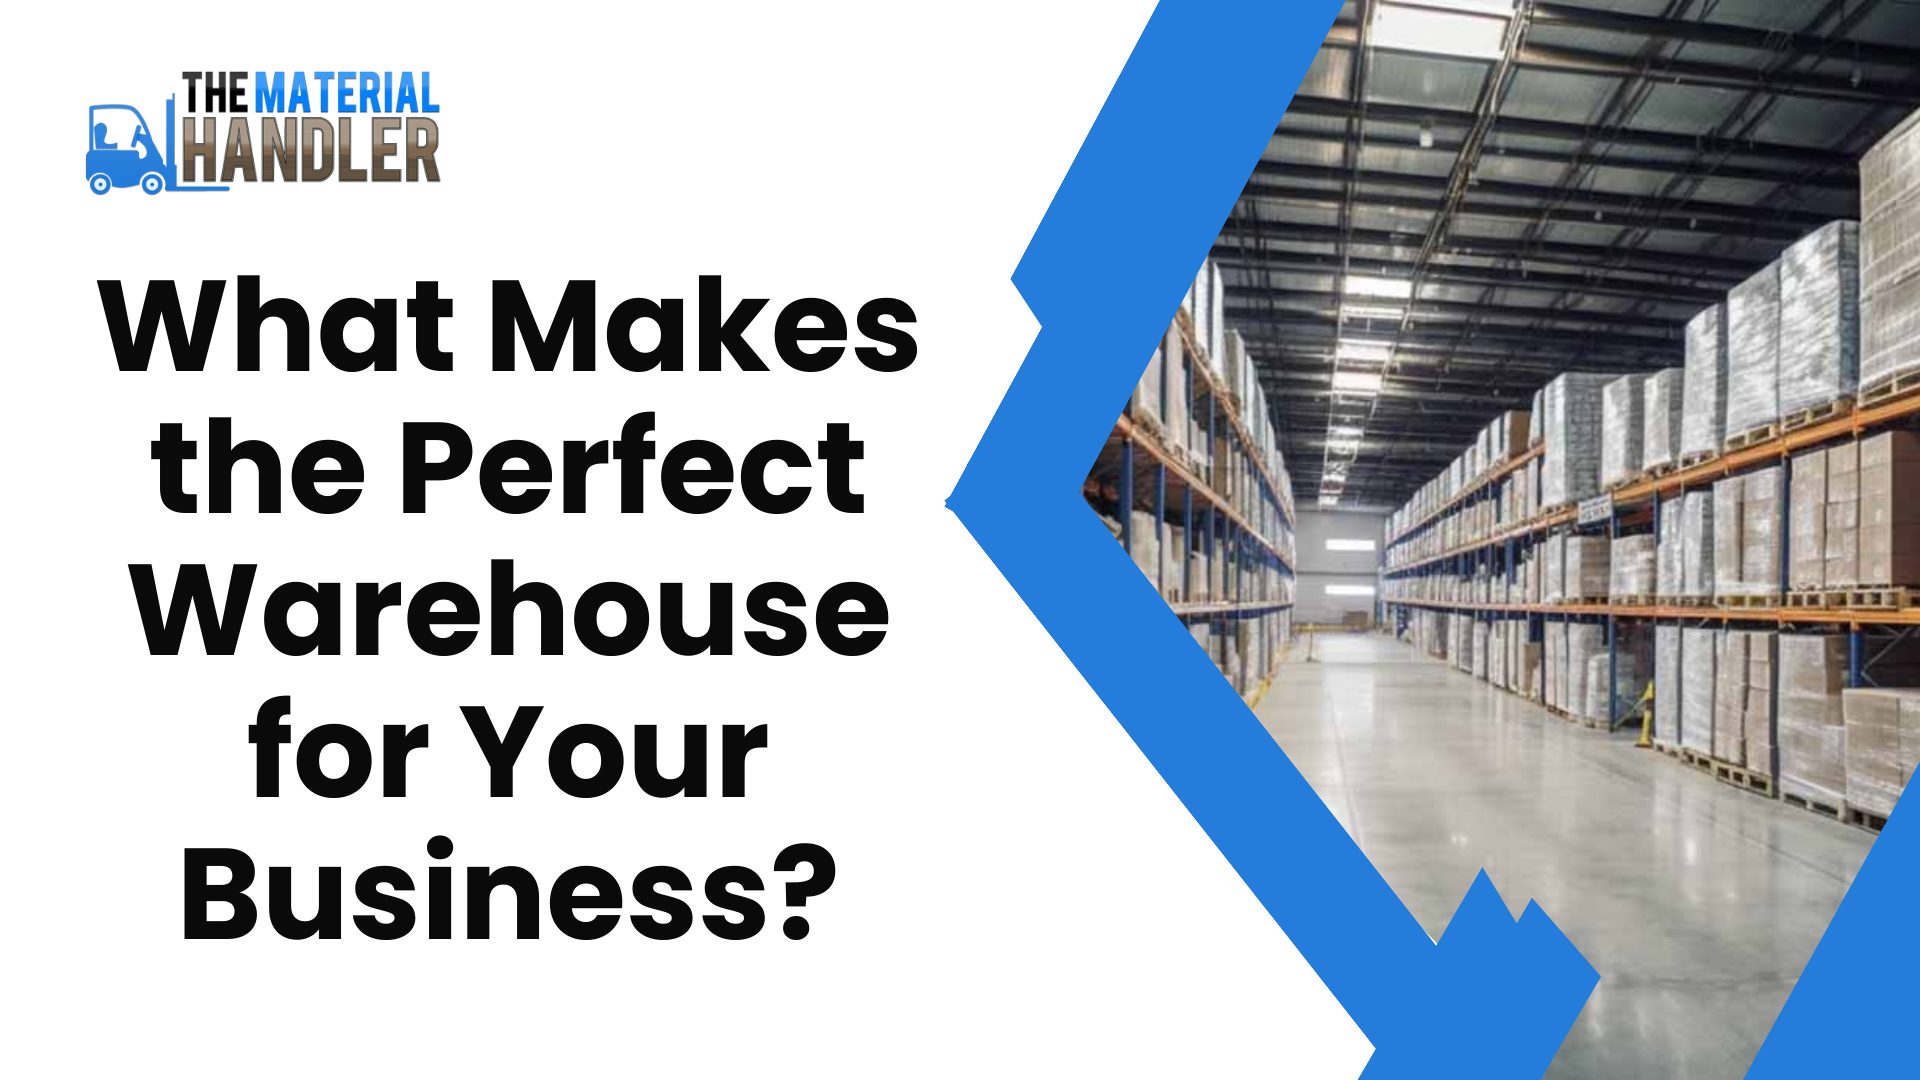 The perfect warehouse for your bussiness